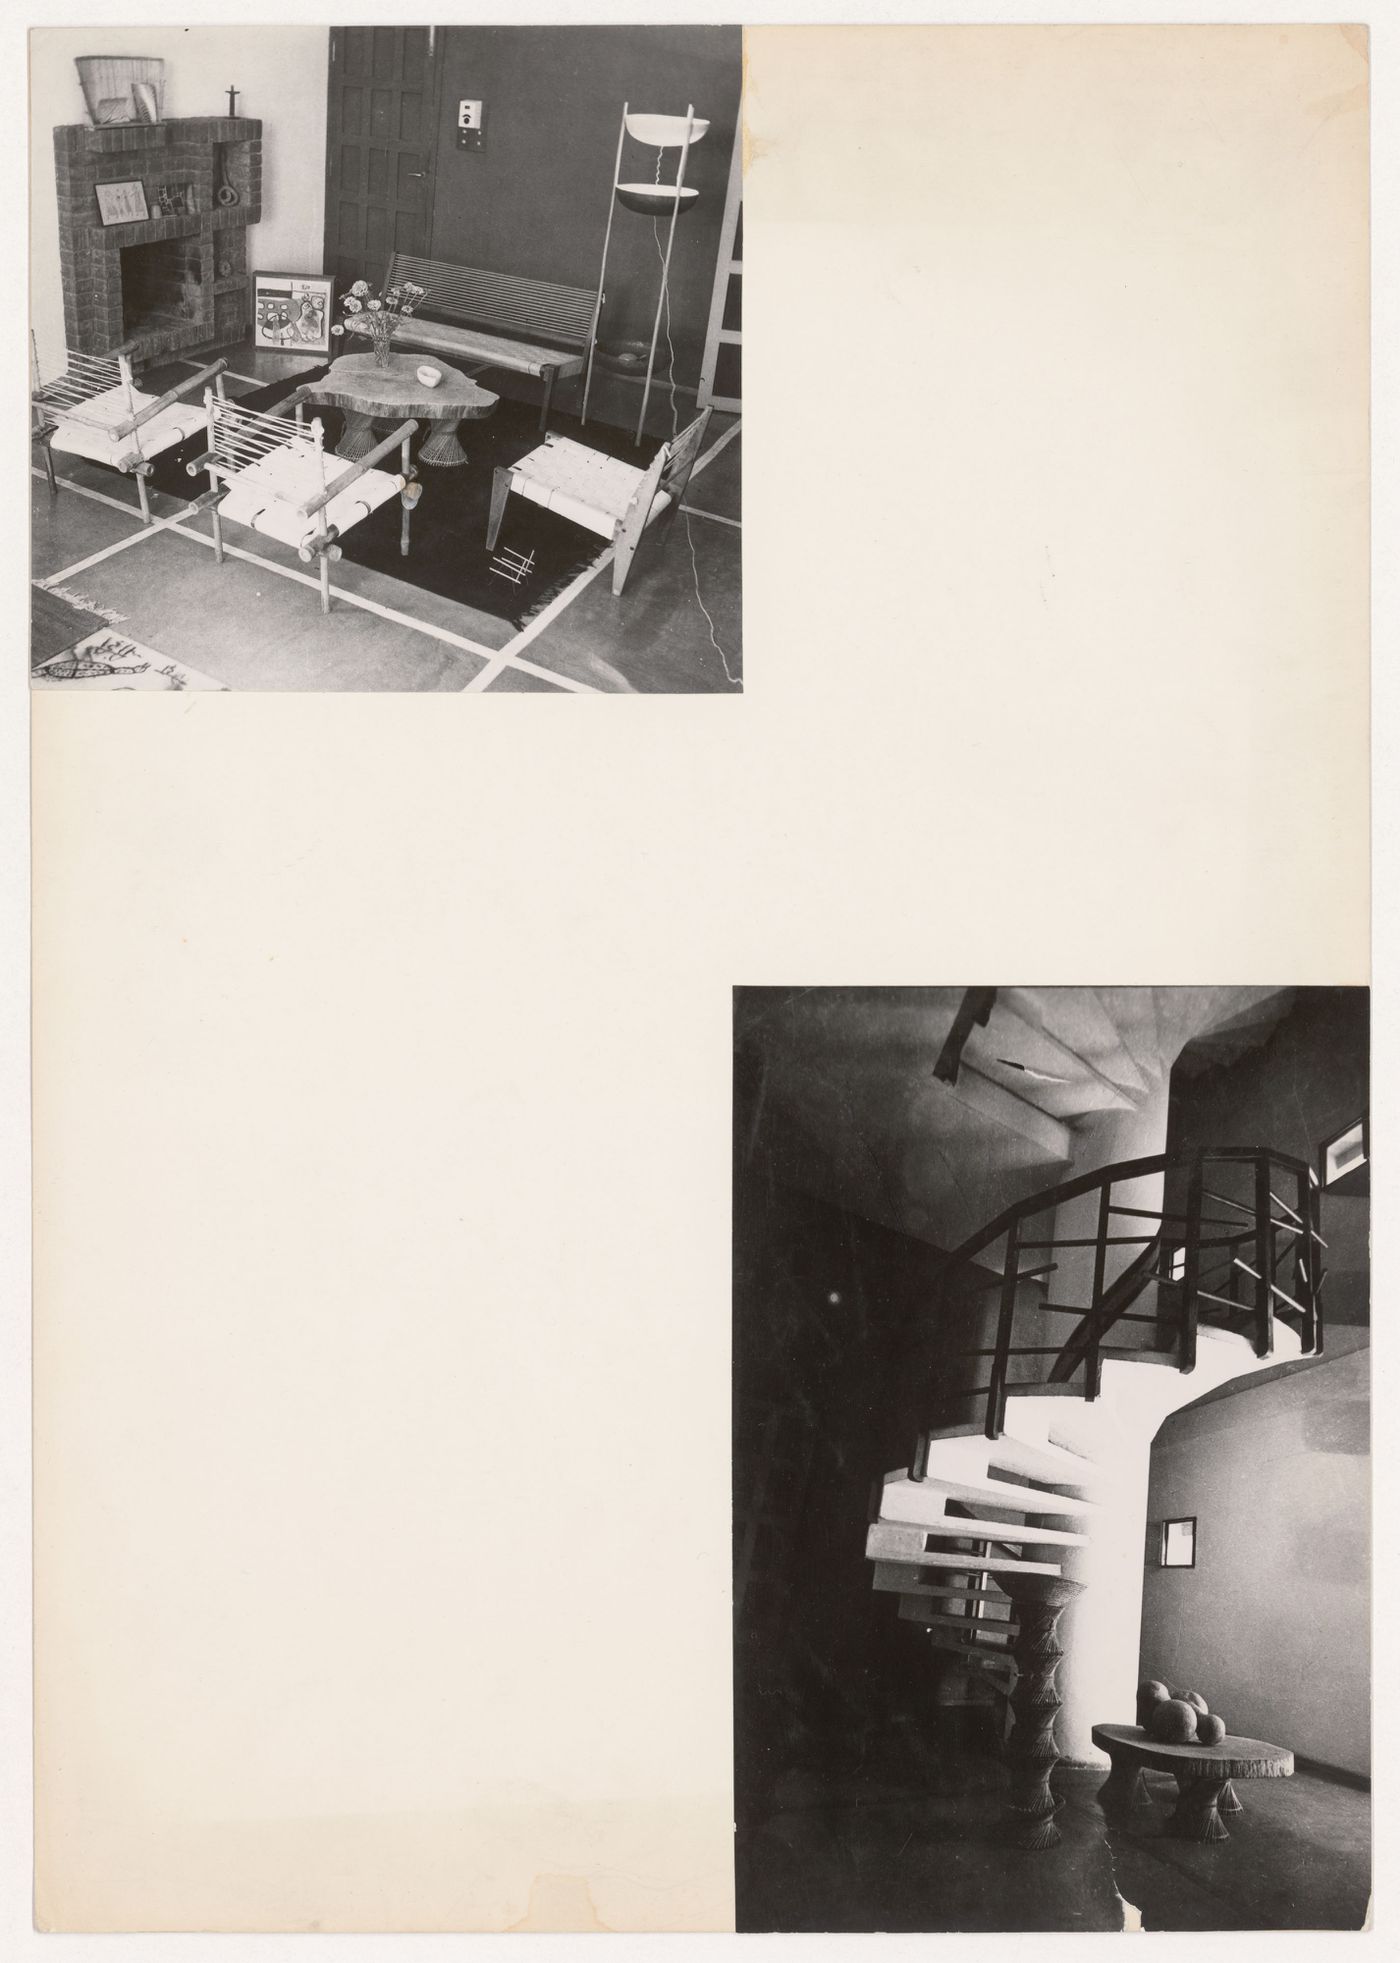 Views of furniture designed by Pierre Jeanneret and Eulie Chowdhury and of a prefabricated staircase designed by Pierre Jeanneret, Chandigarh, India